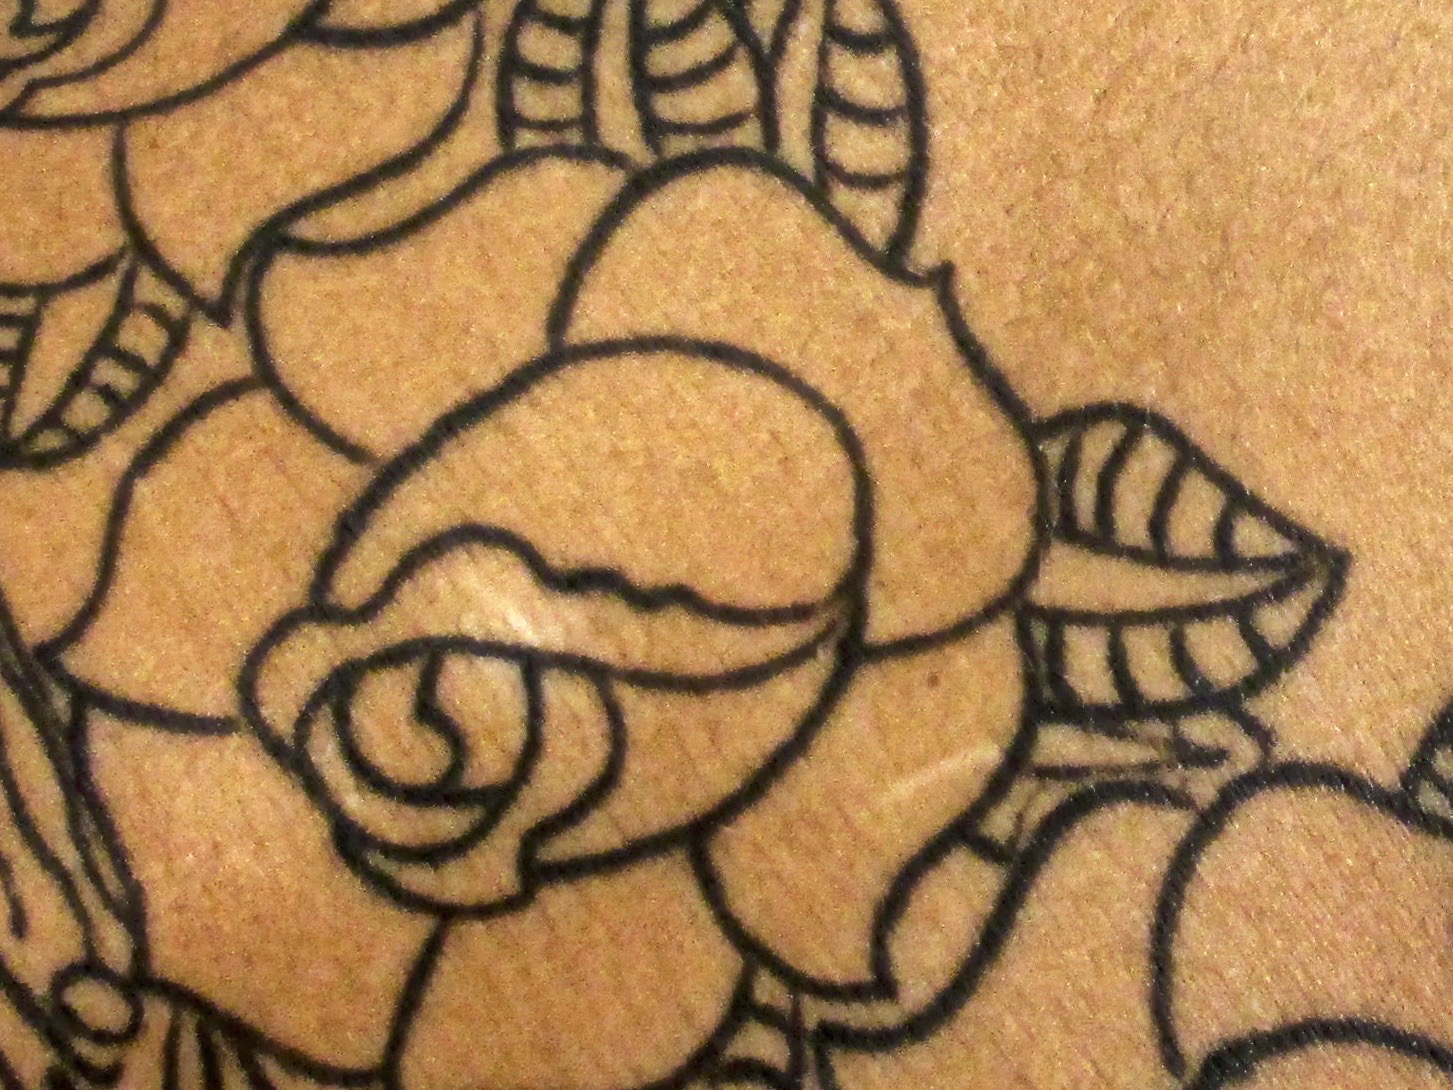 outline flower tattoo before removal